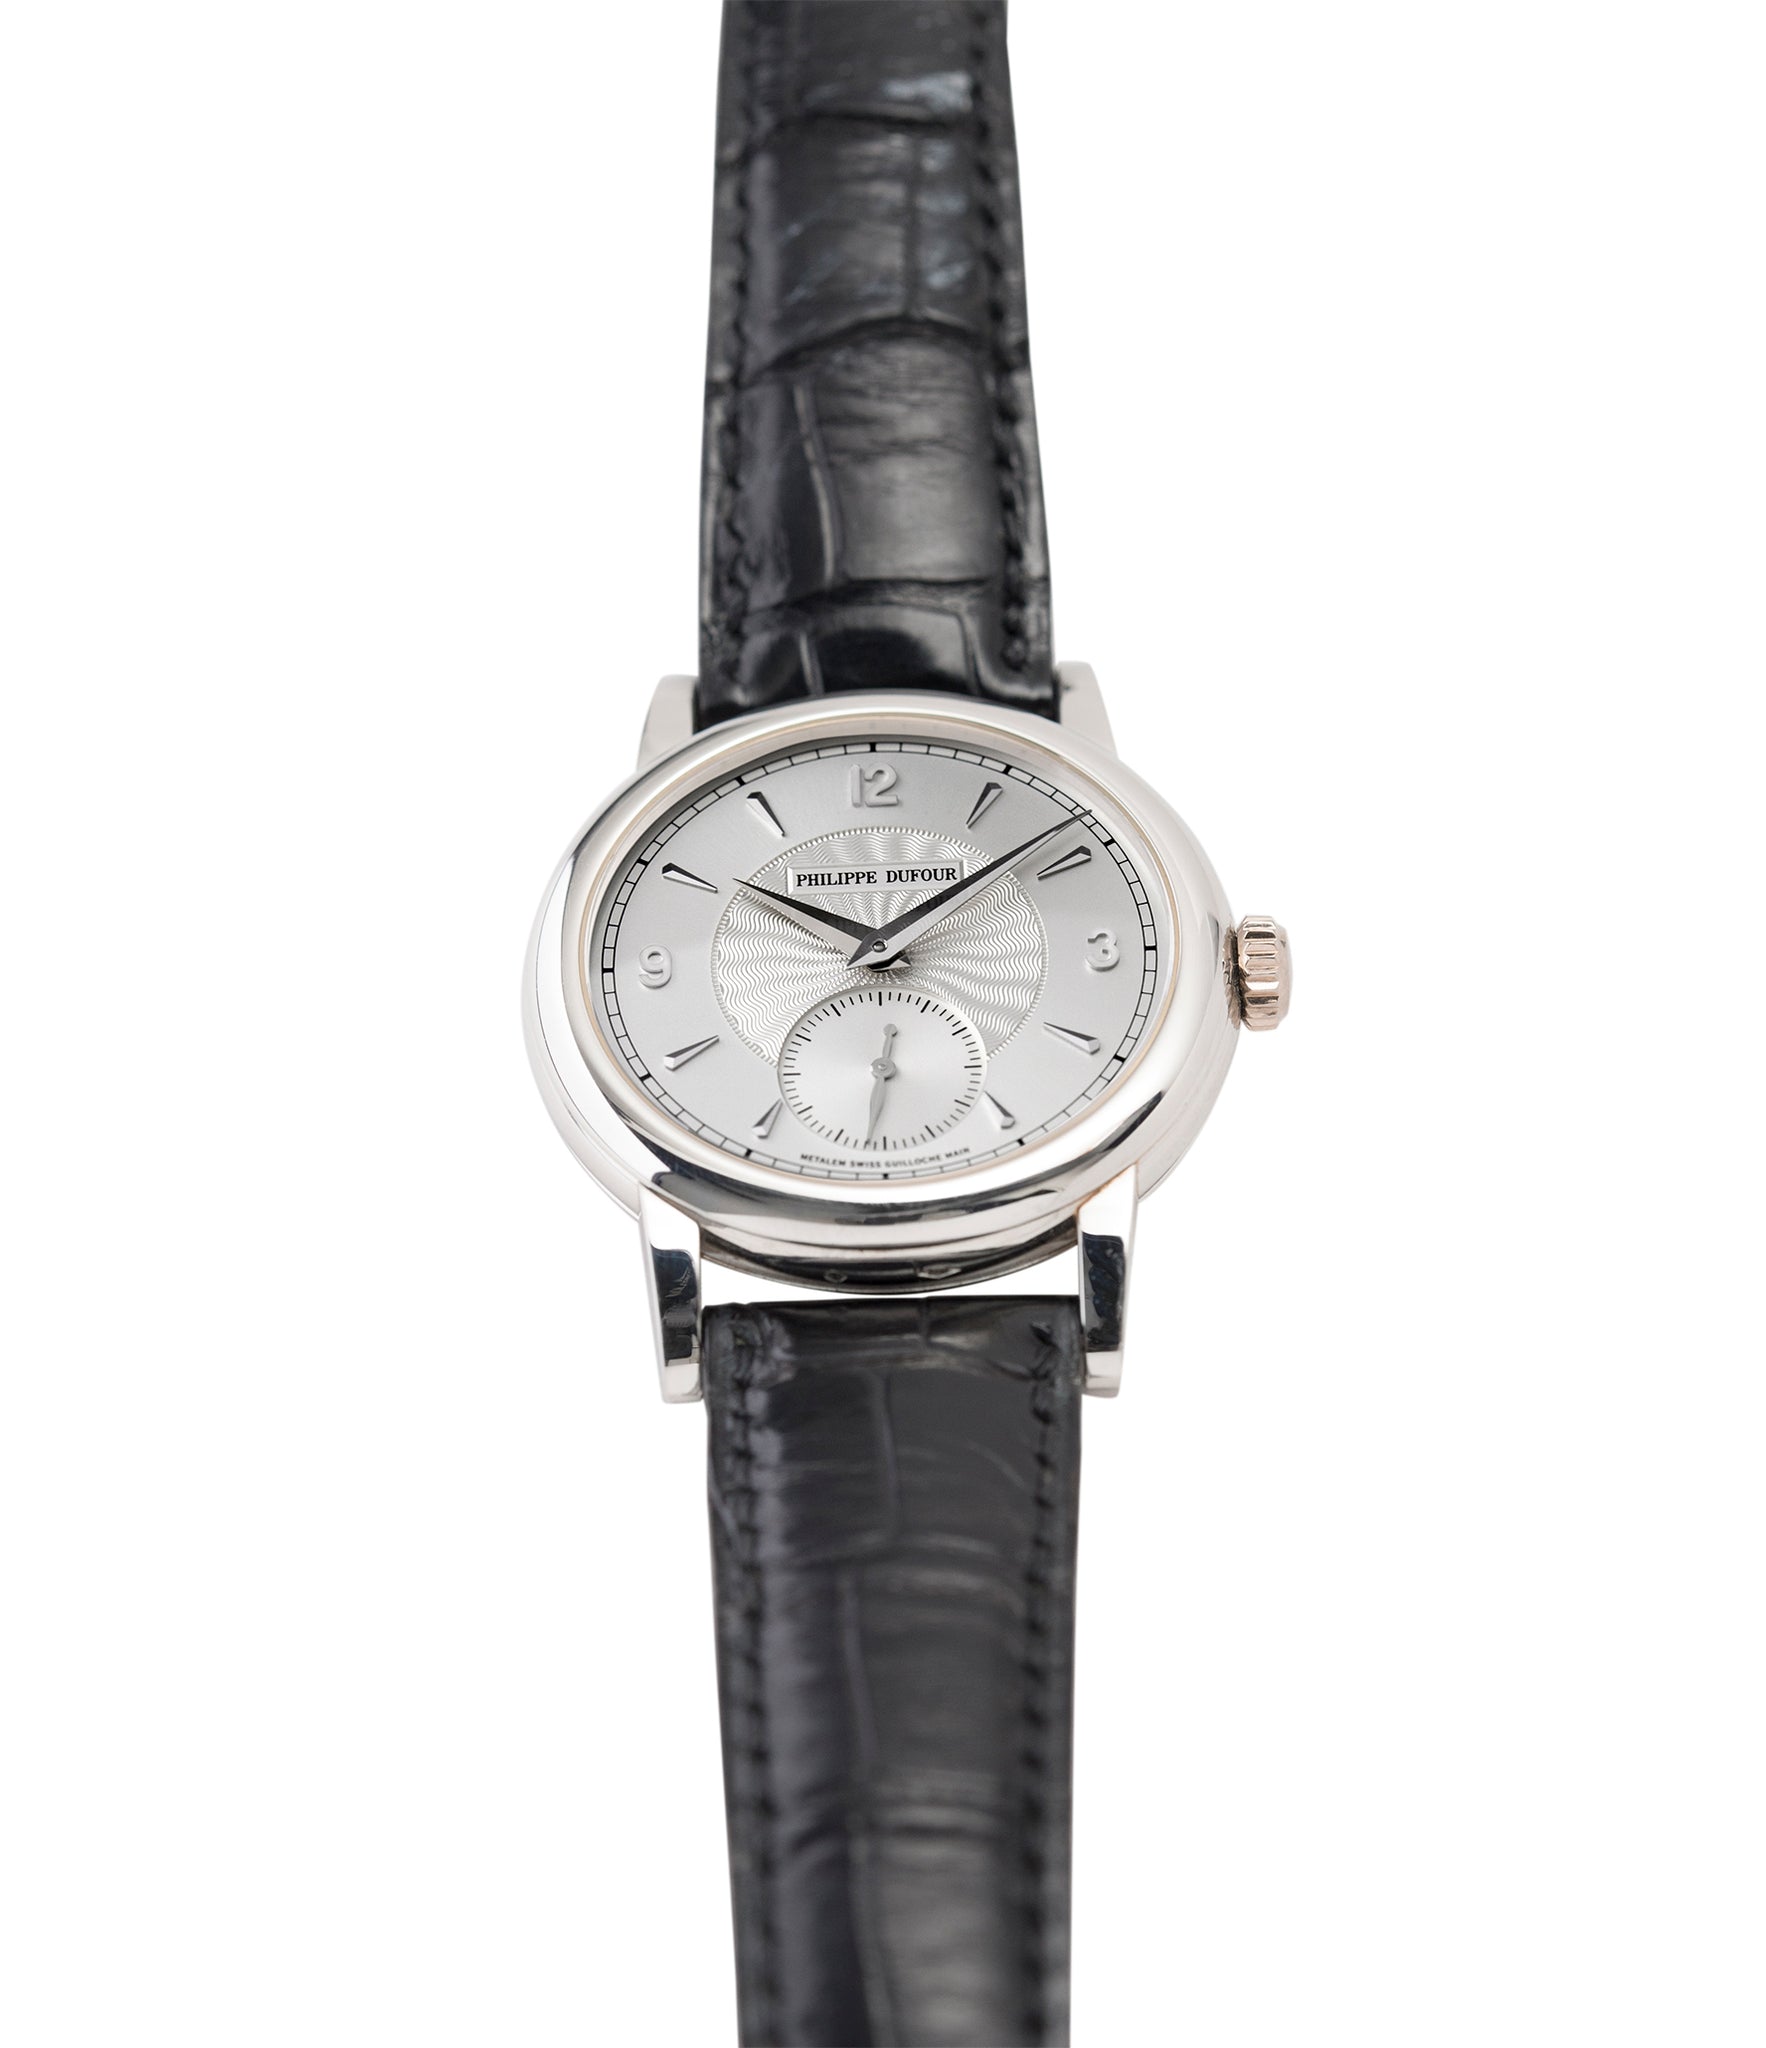 selling Simplicity watch by Philippe Dufour platinum time-only dress watch for sale online at A Collected Man London UK approved specialist of preowned independent watchmakers